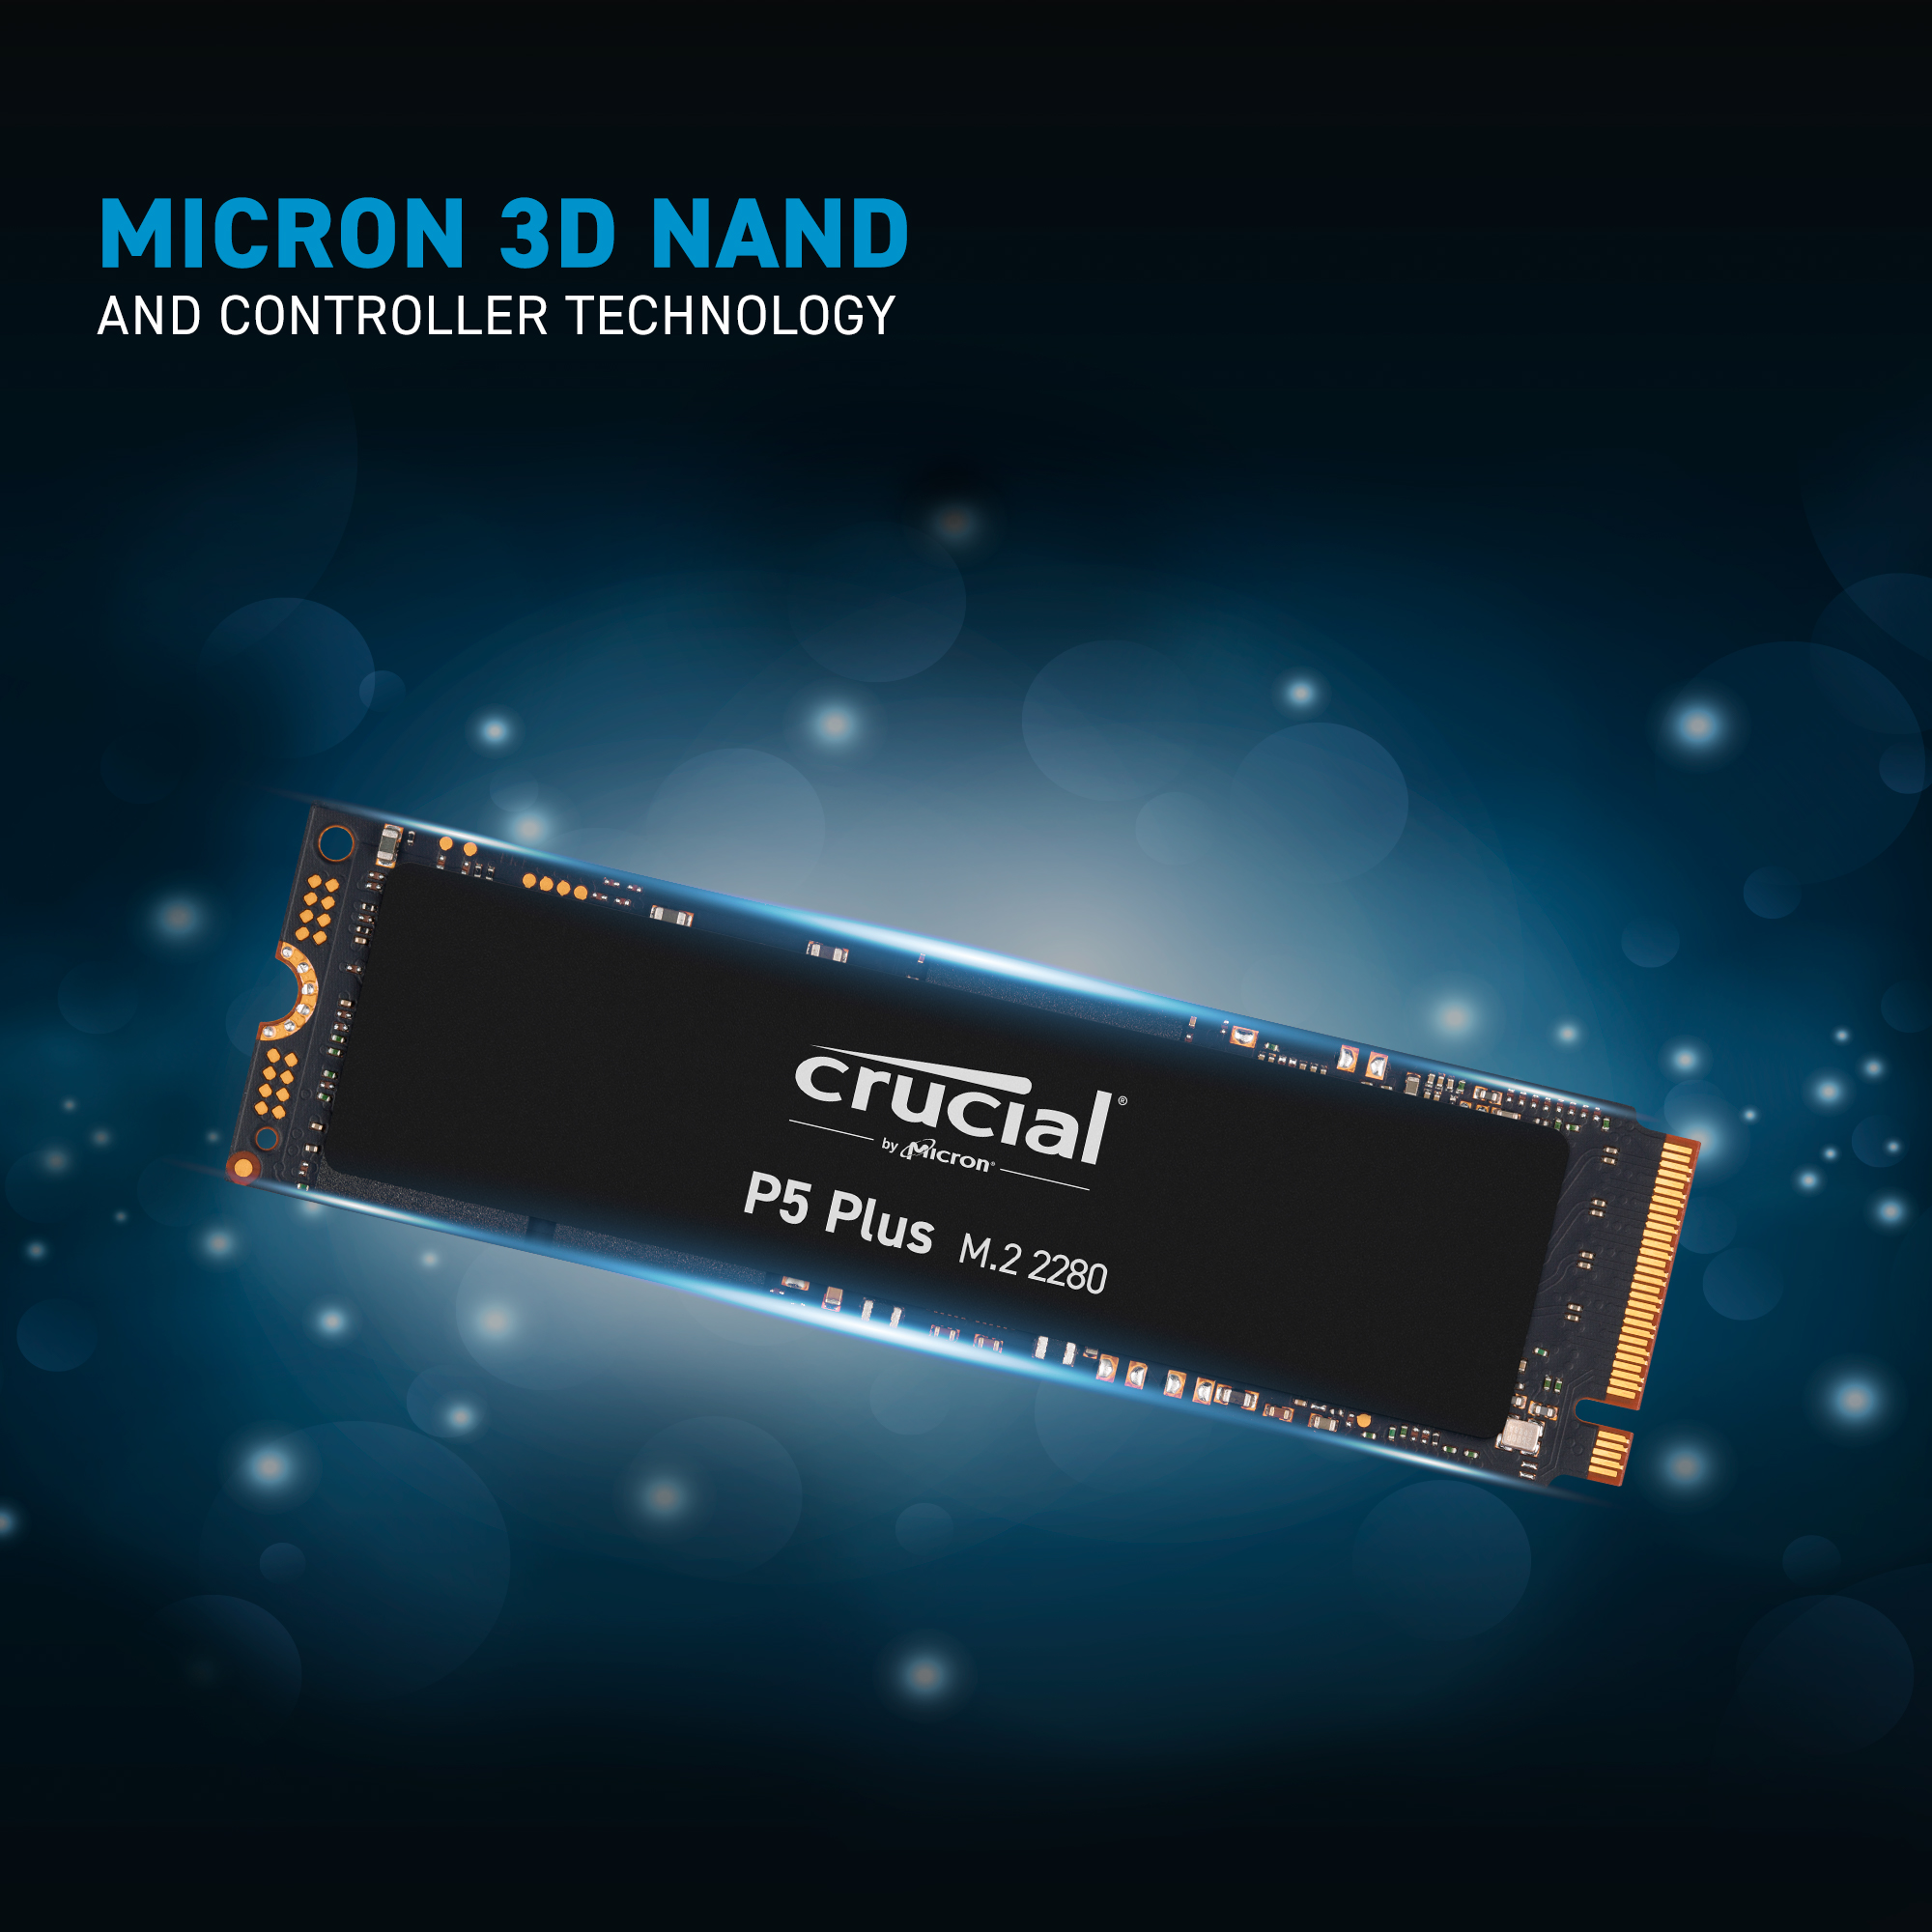 Crucial P5 Plus with Micron 3D NAND